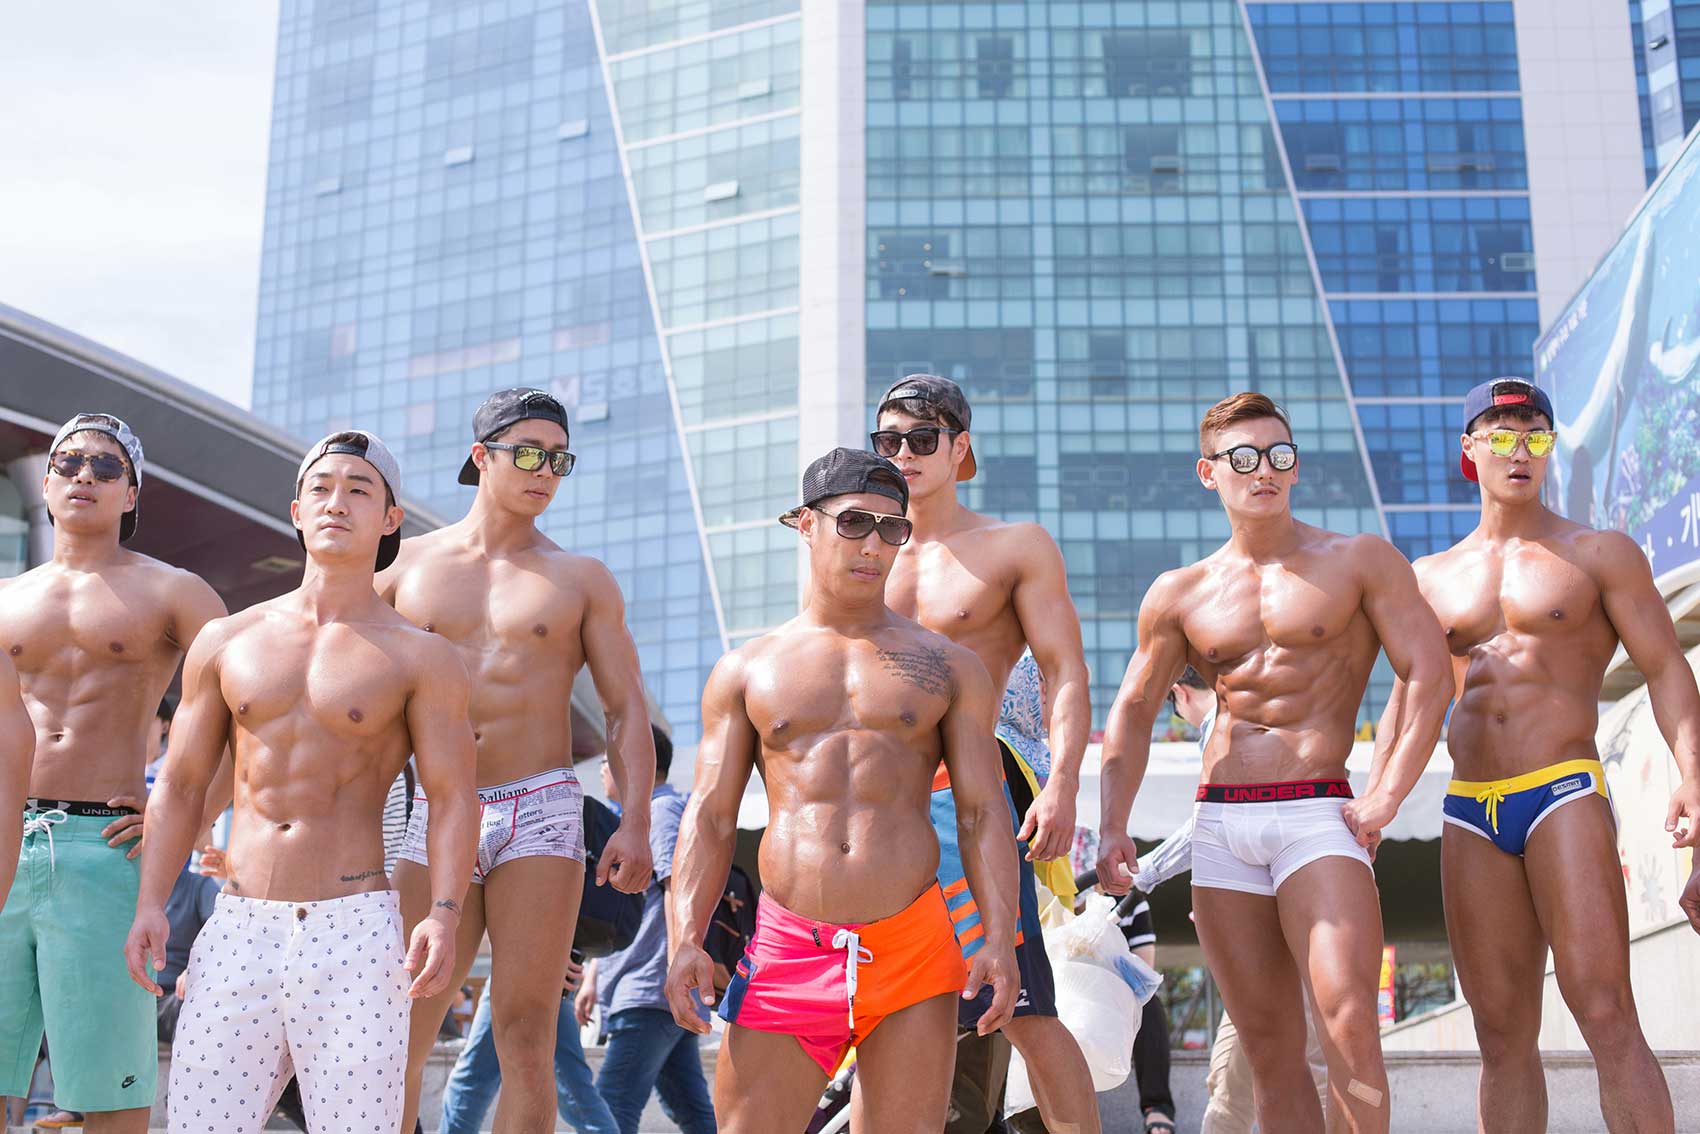 Bodybuilders at Haeundae Beach in Busan. Koreans are mad about health and physical appearance. Here appearance matters most; both in terms of beauty and conformity to norms.